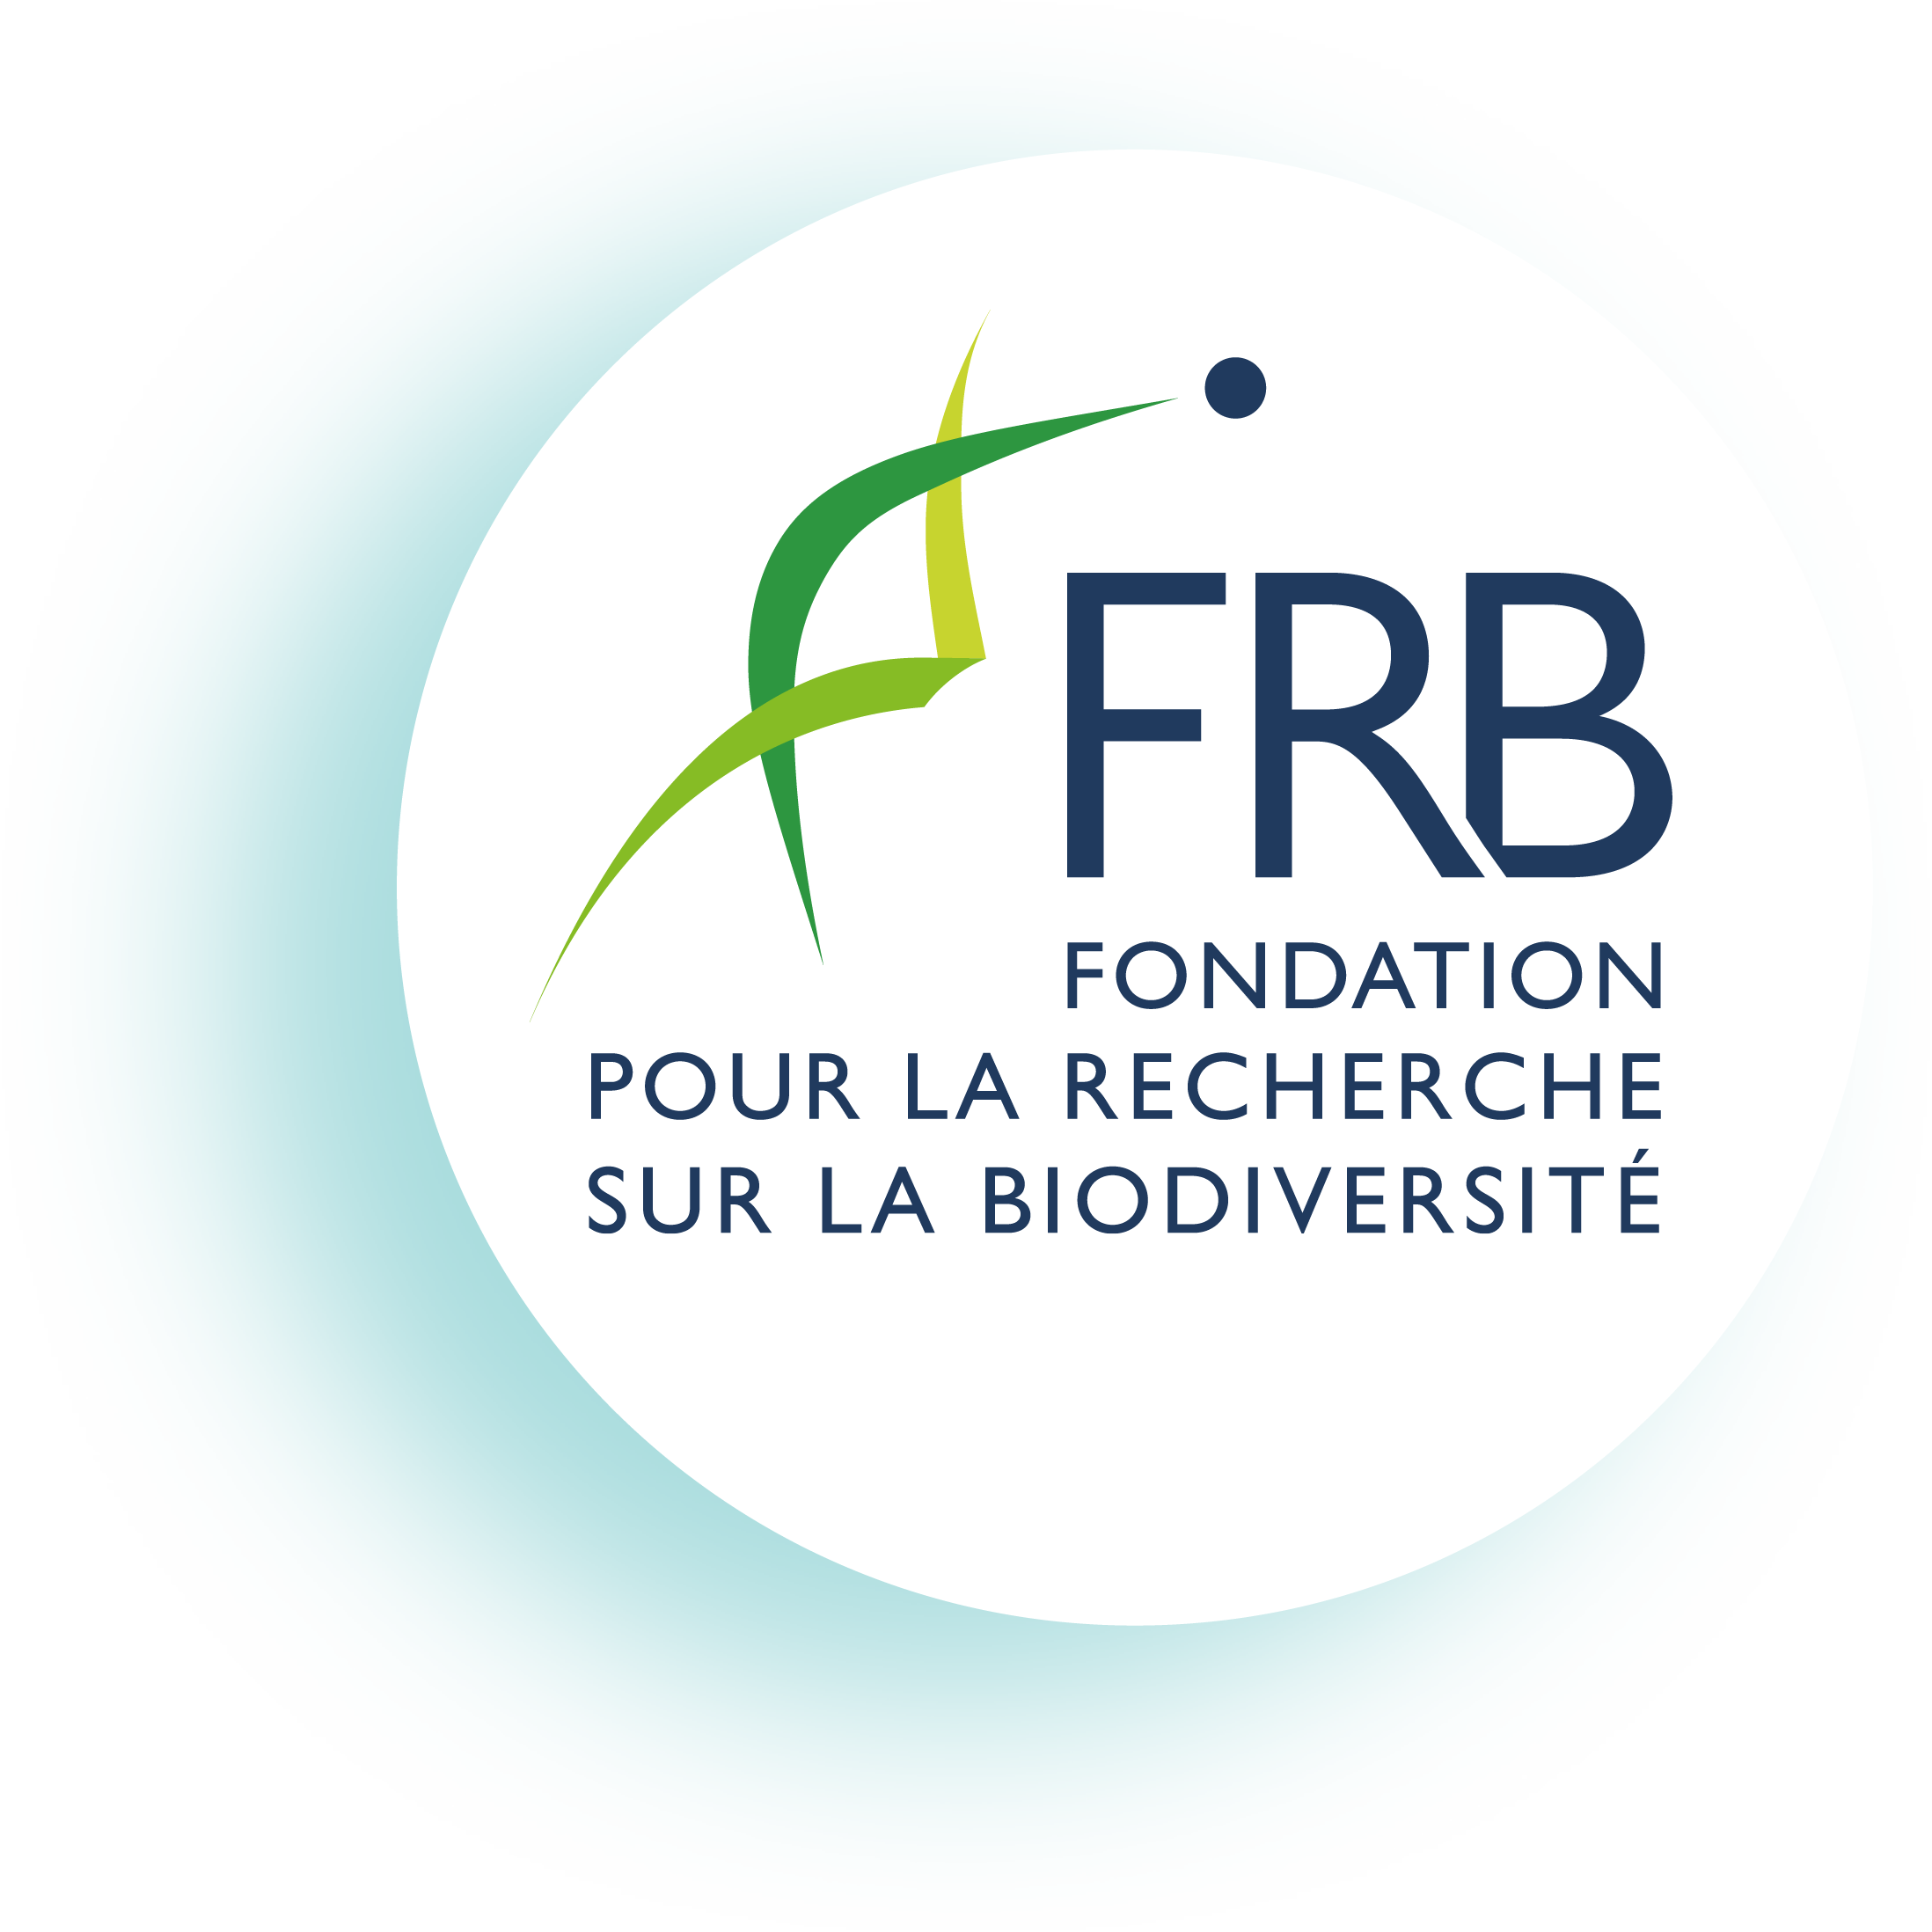 Fundation for Research on Biodiversity